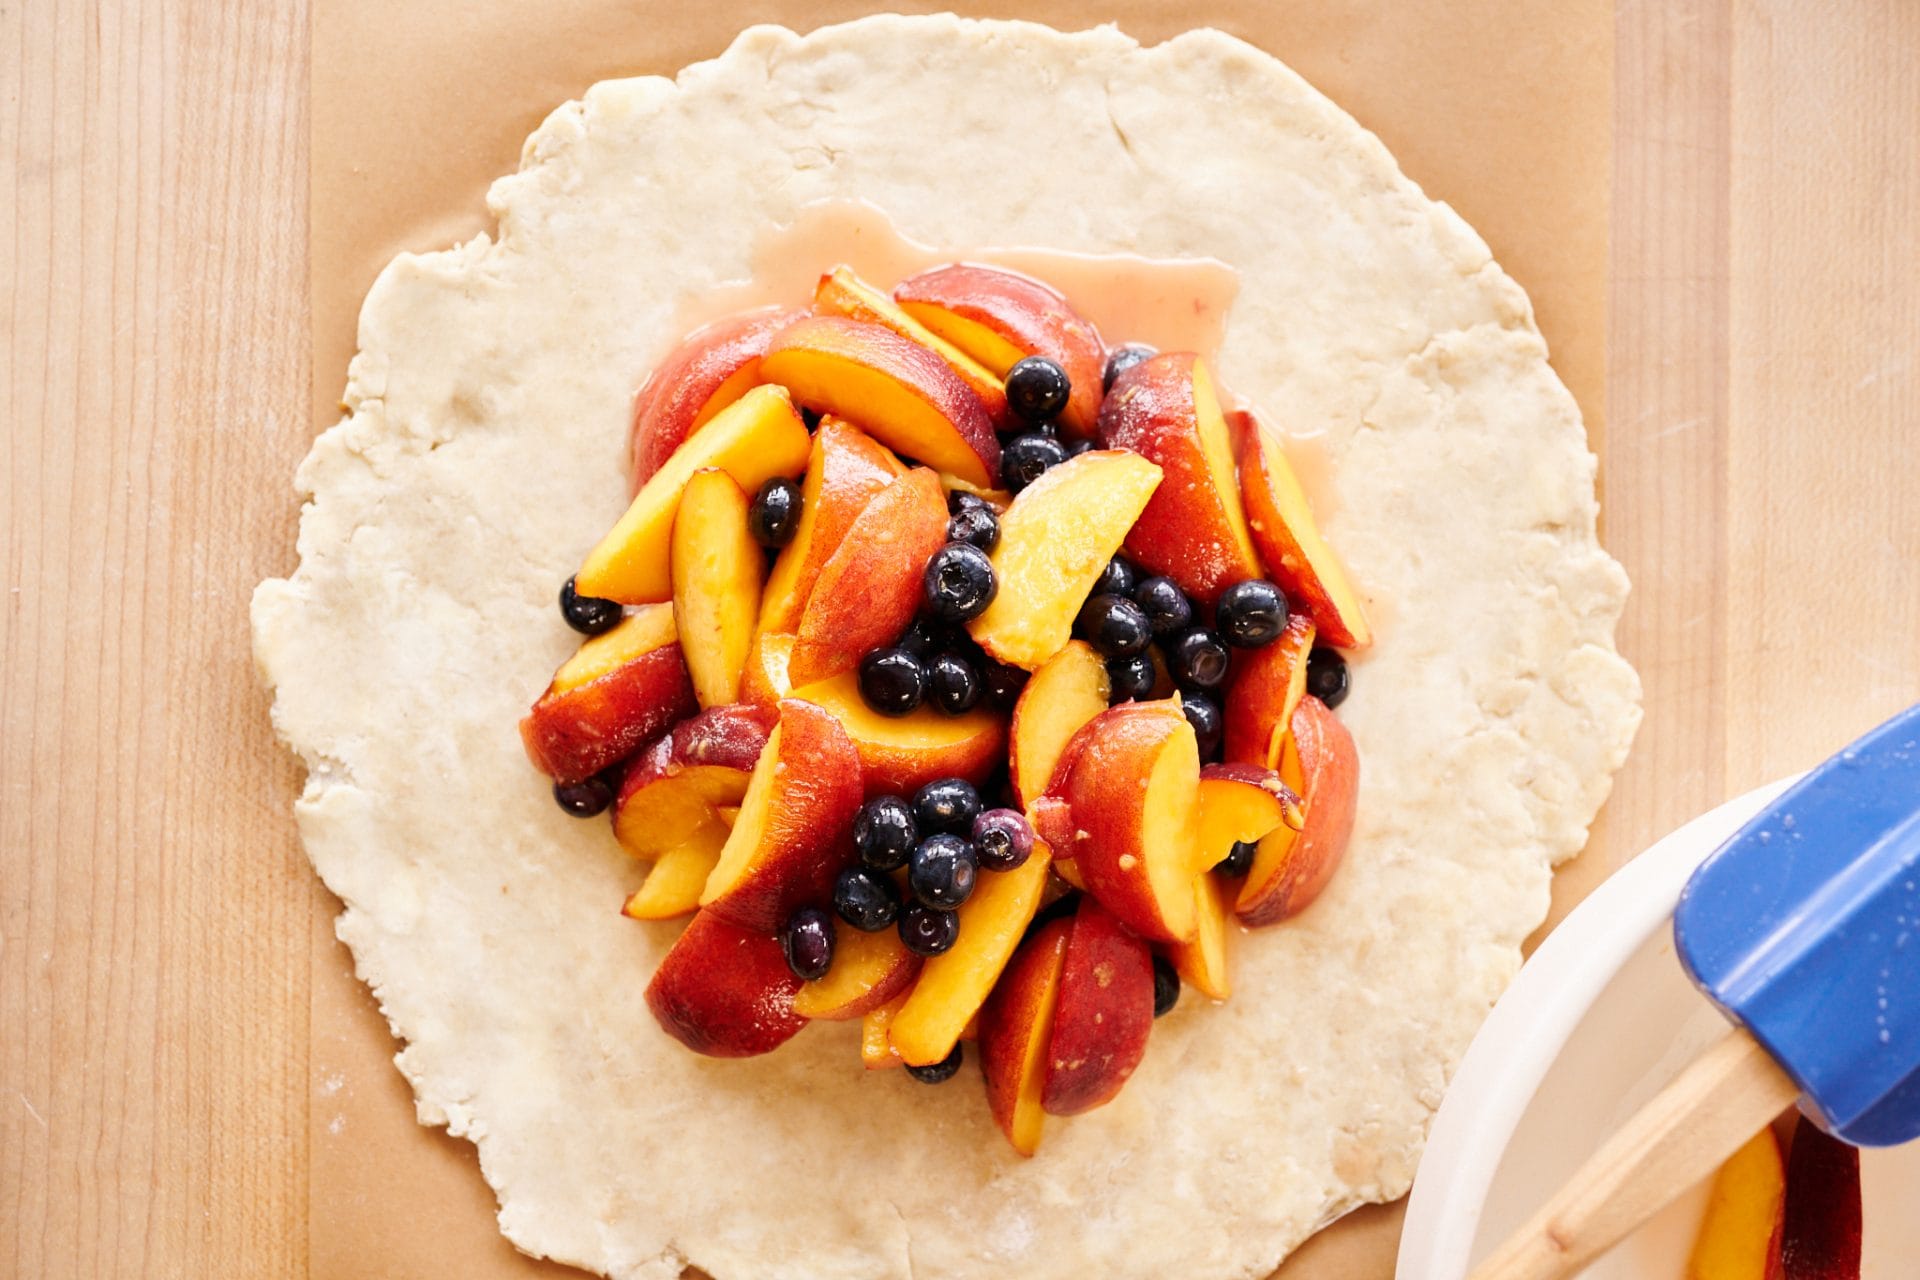 Sourdough pie crust filled with peaches and blueberries.